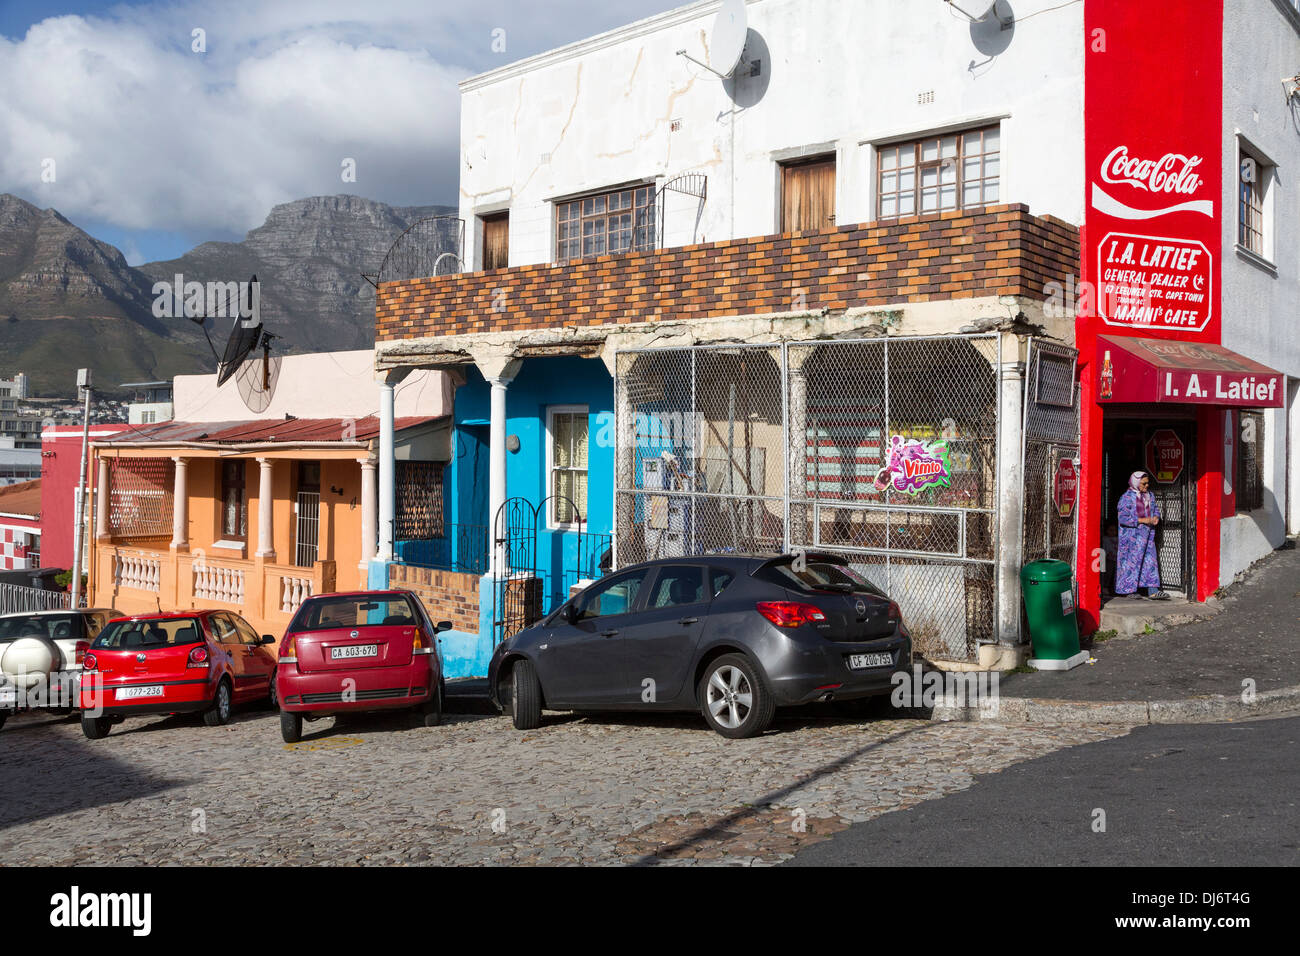 South Africa, Cape Town, Bo-kaap. Corner Grocery Store. Table Mountain in background. Stock Photo